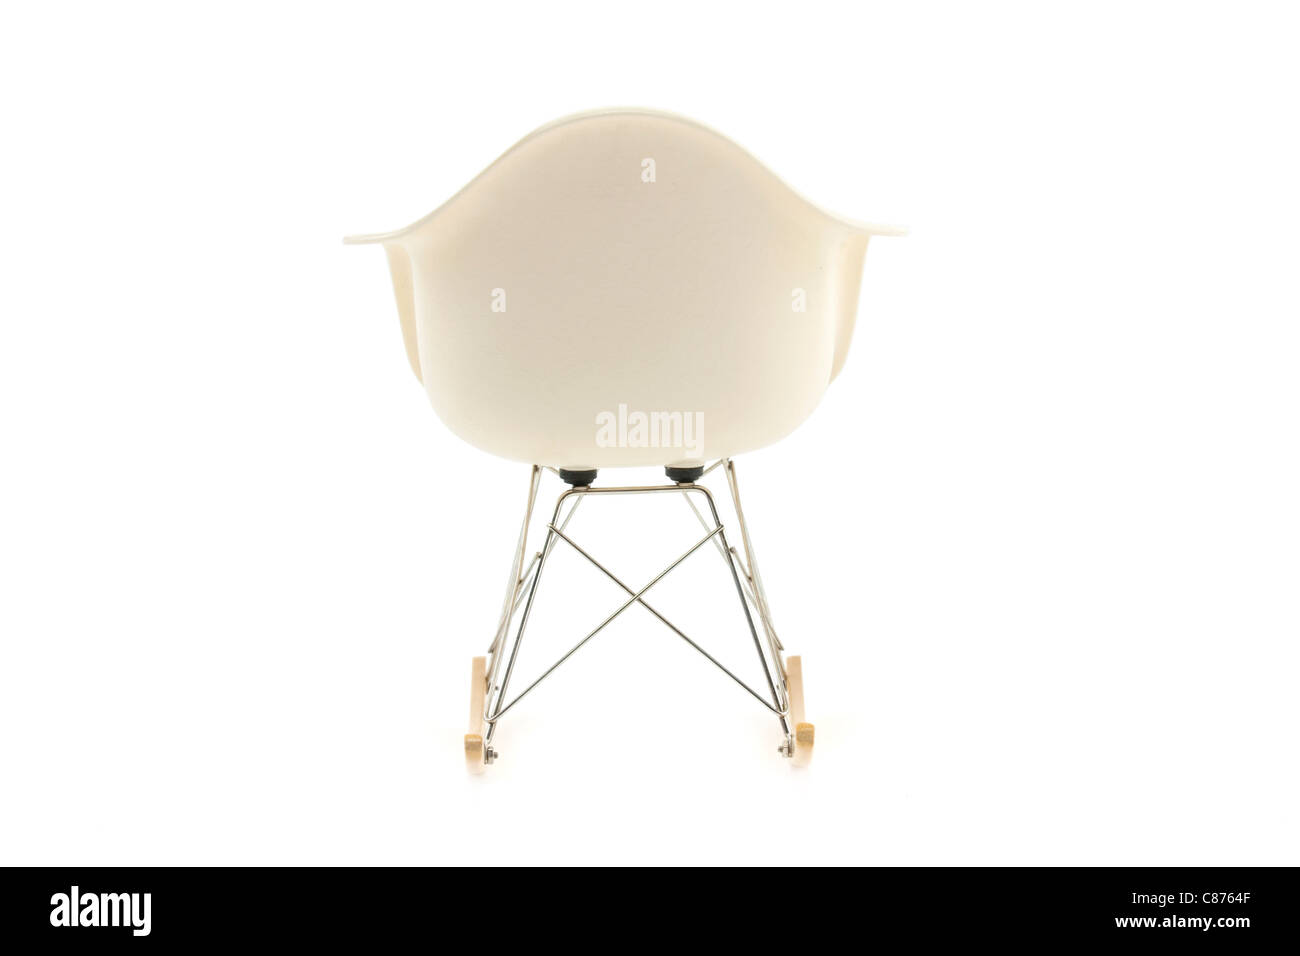 modern design classic eames rocking chair on white background Stock Photo